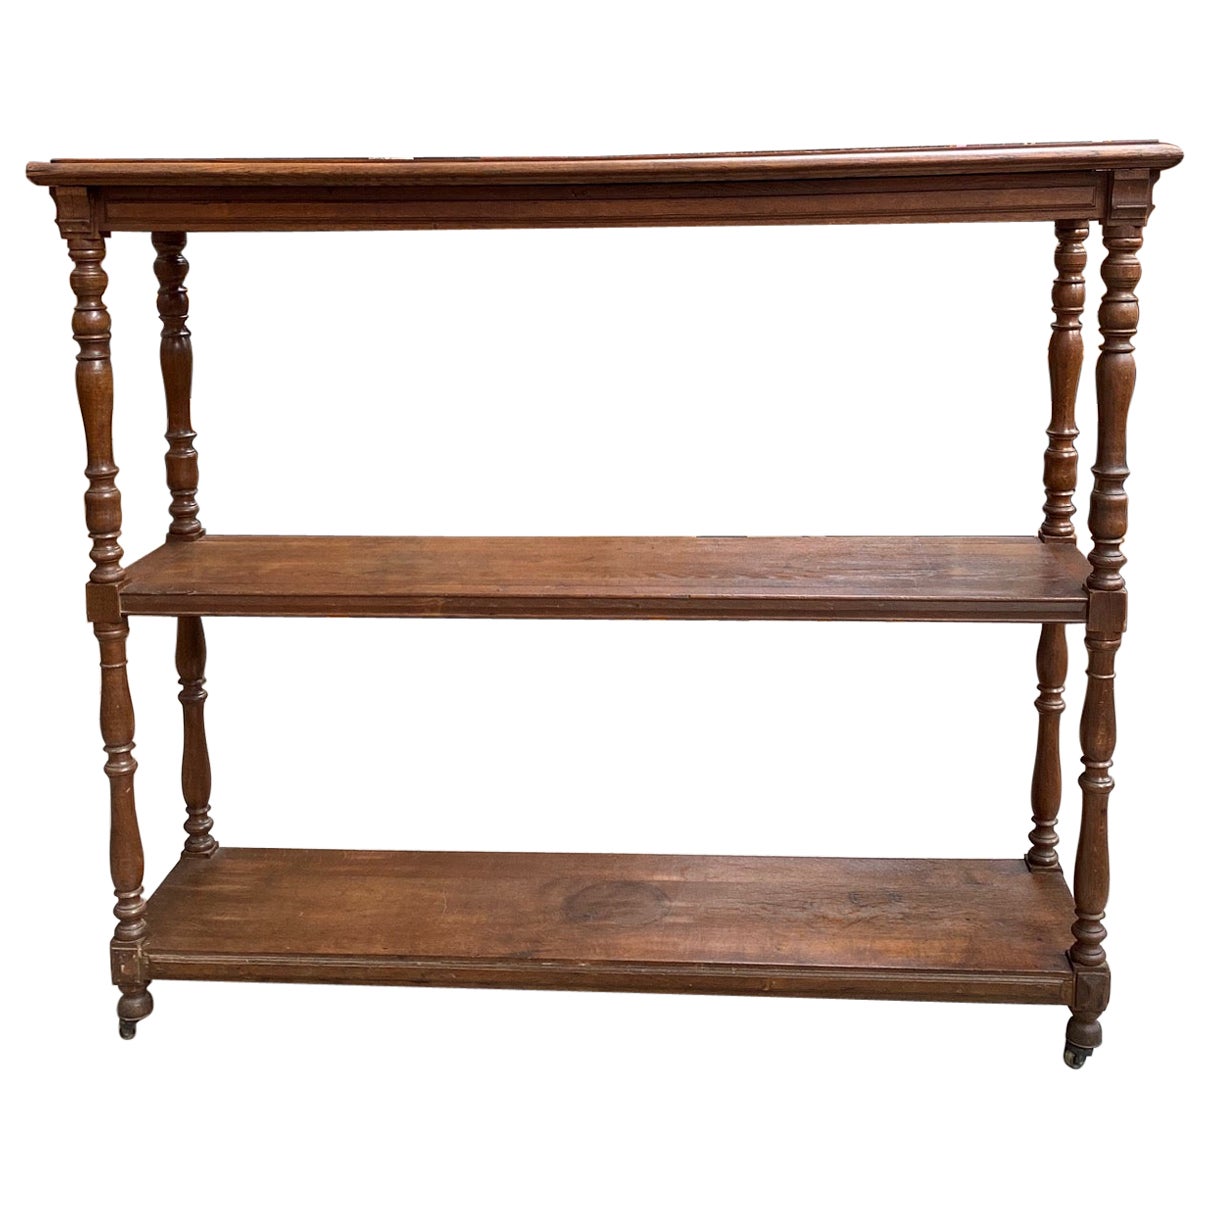 Late 19th century store shelf For Sale